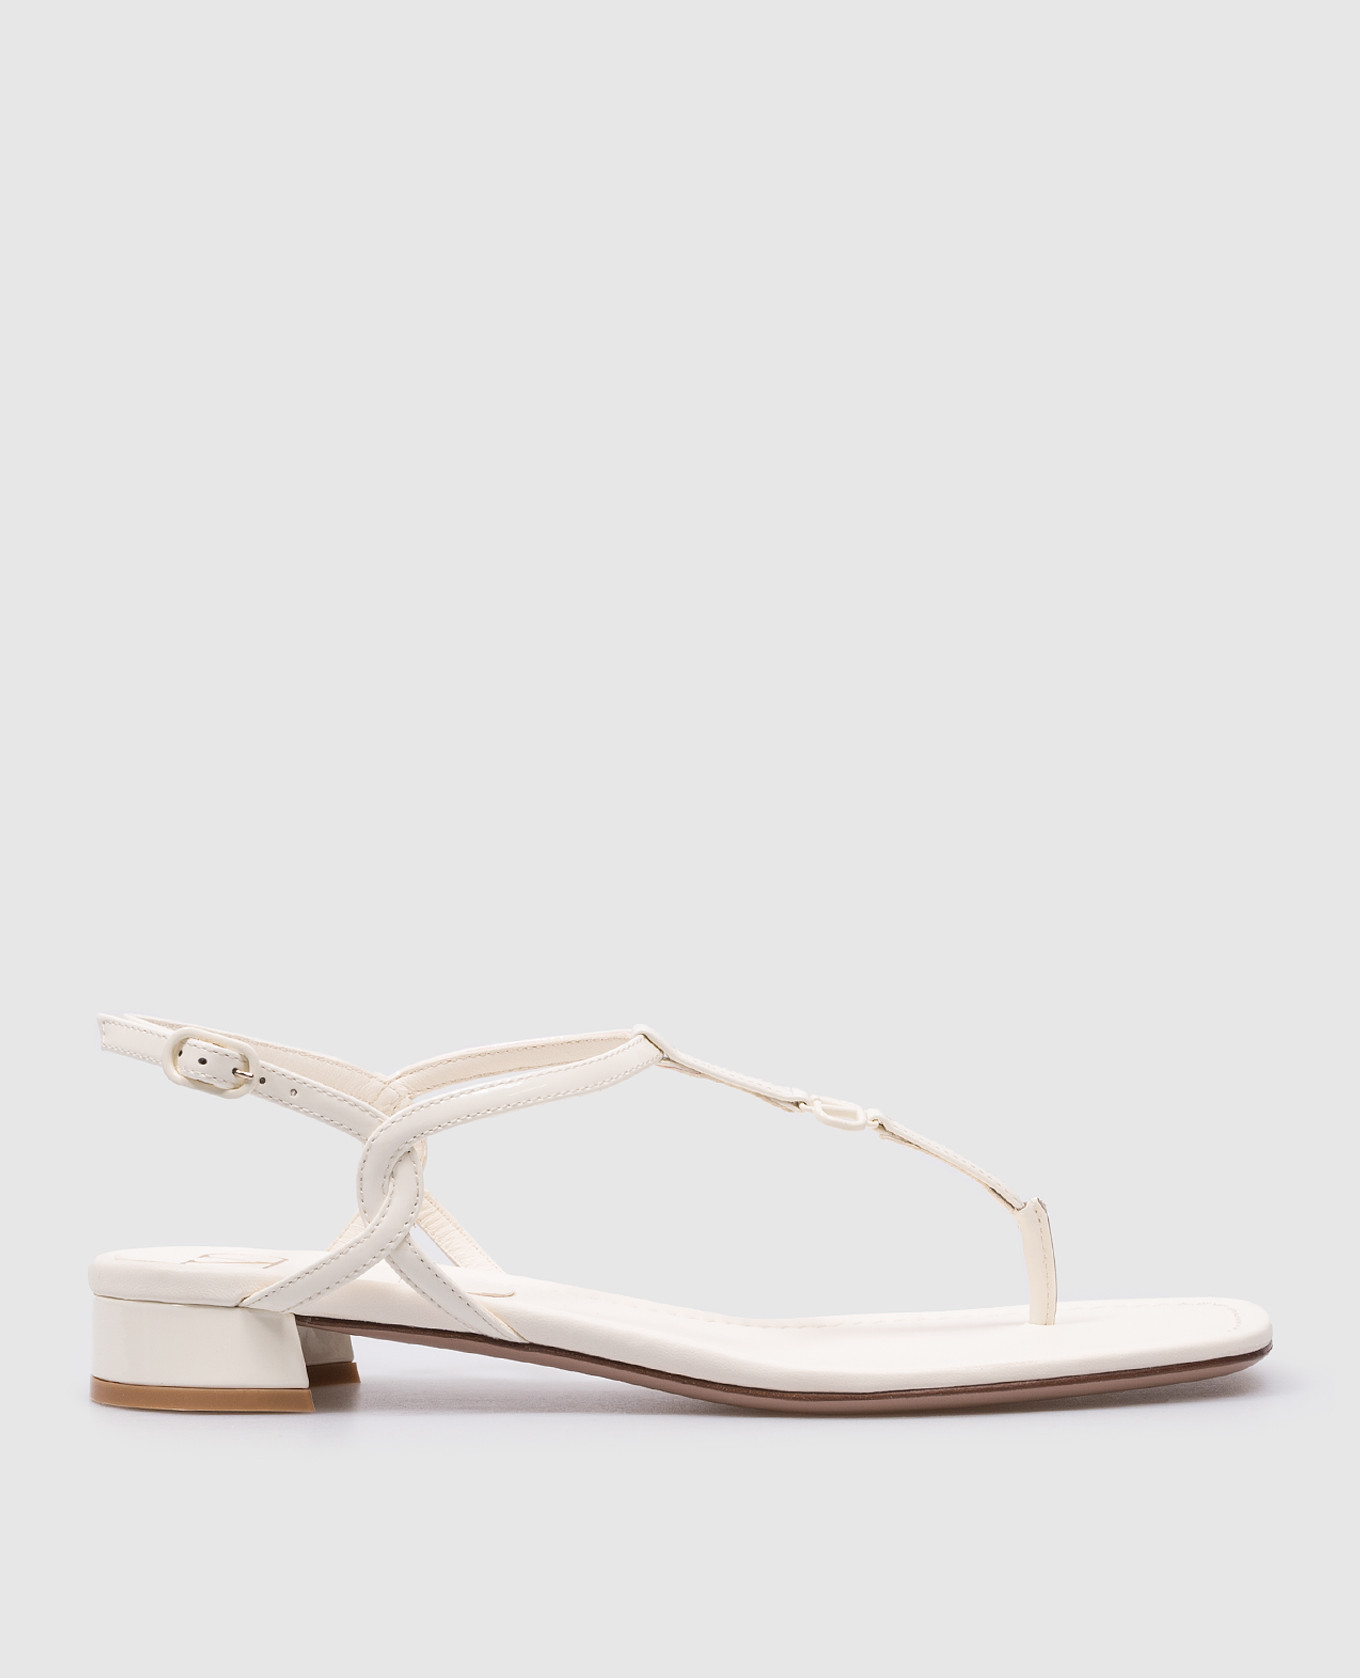 White patent leather sandals with VLogo Signature logo